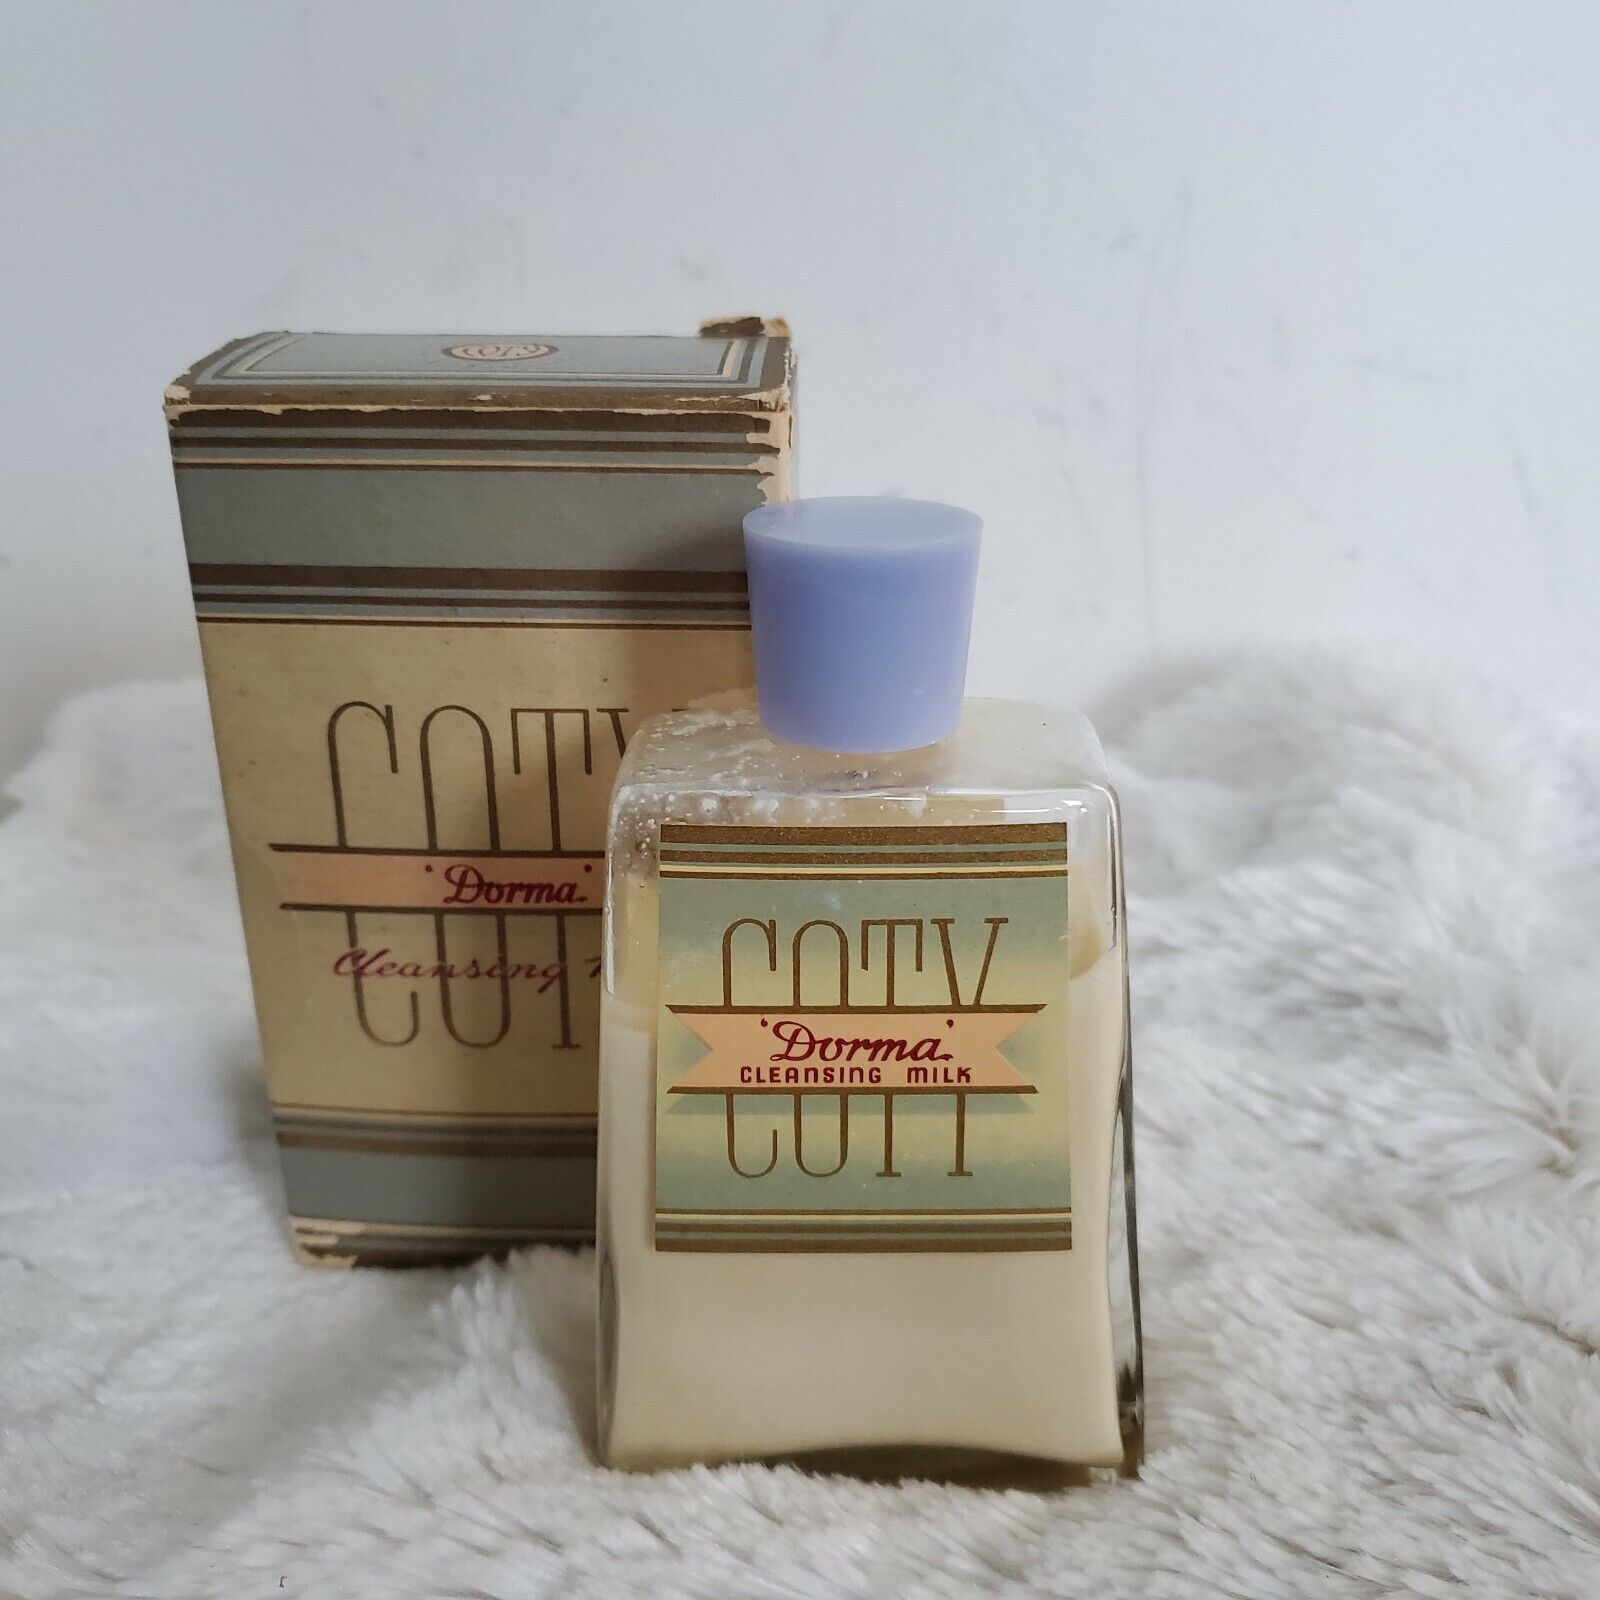 Vintage Antique Vanity Beauty Product Coty Dorma Cleansing Milk In Box